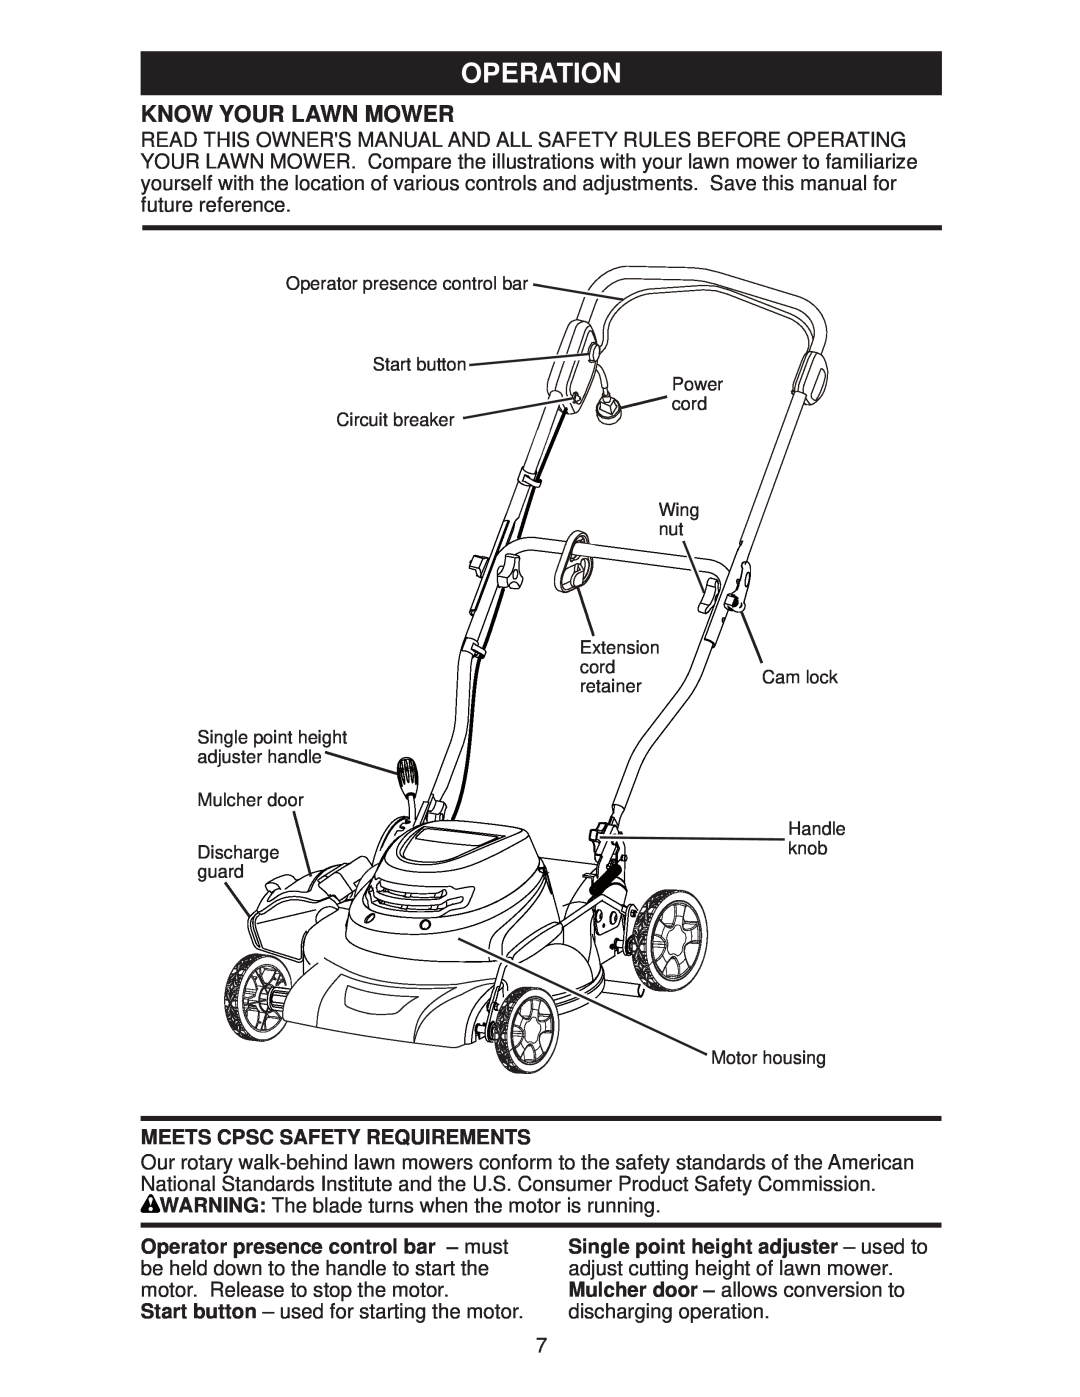 Weed Eater 438181, WE18C, 96112010100 manual Operation, Know Your Lawn Mower 